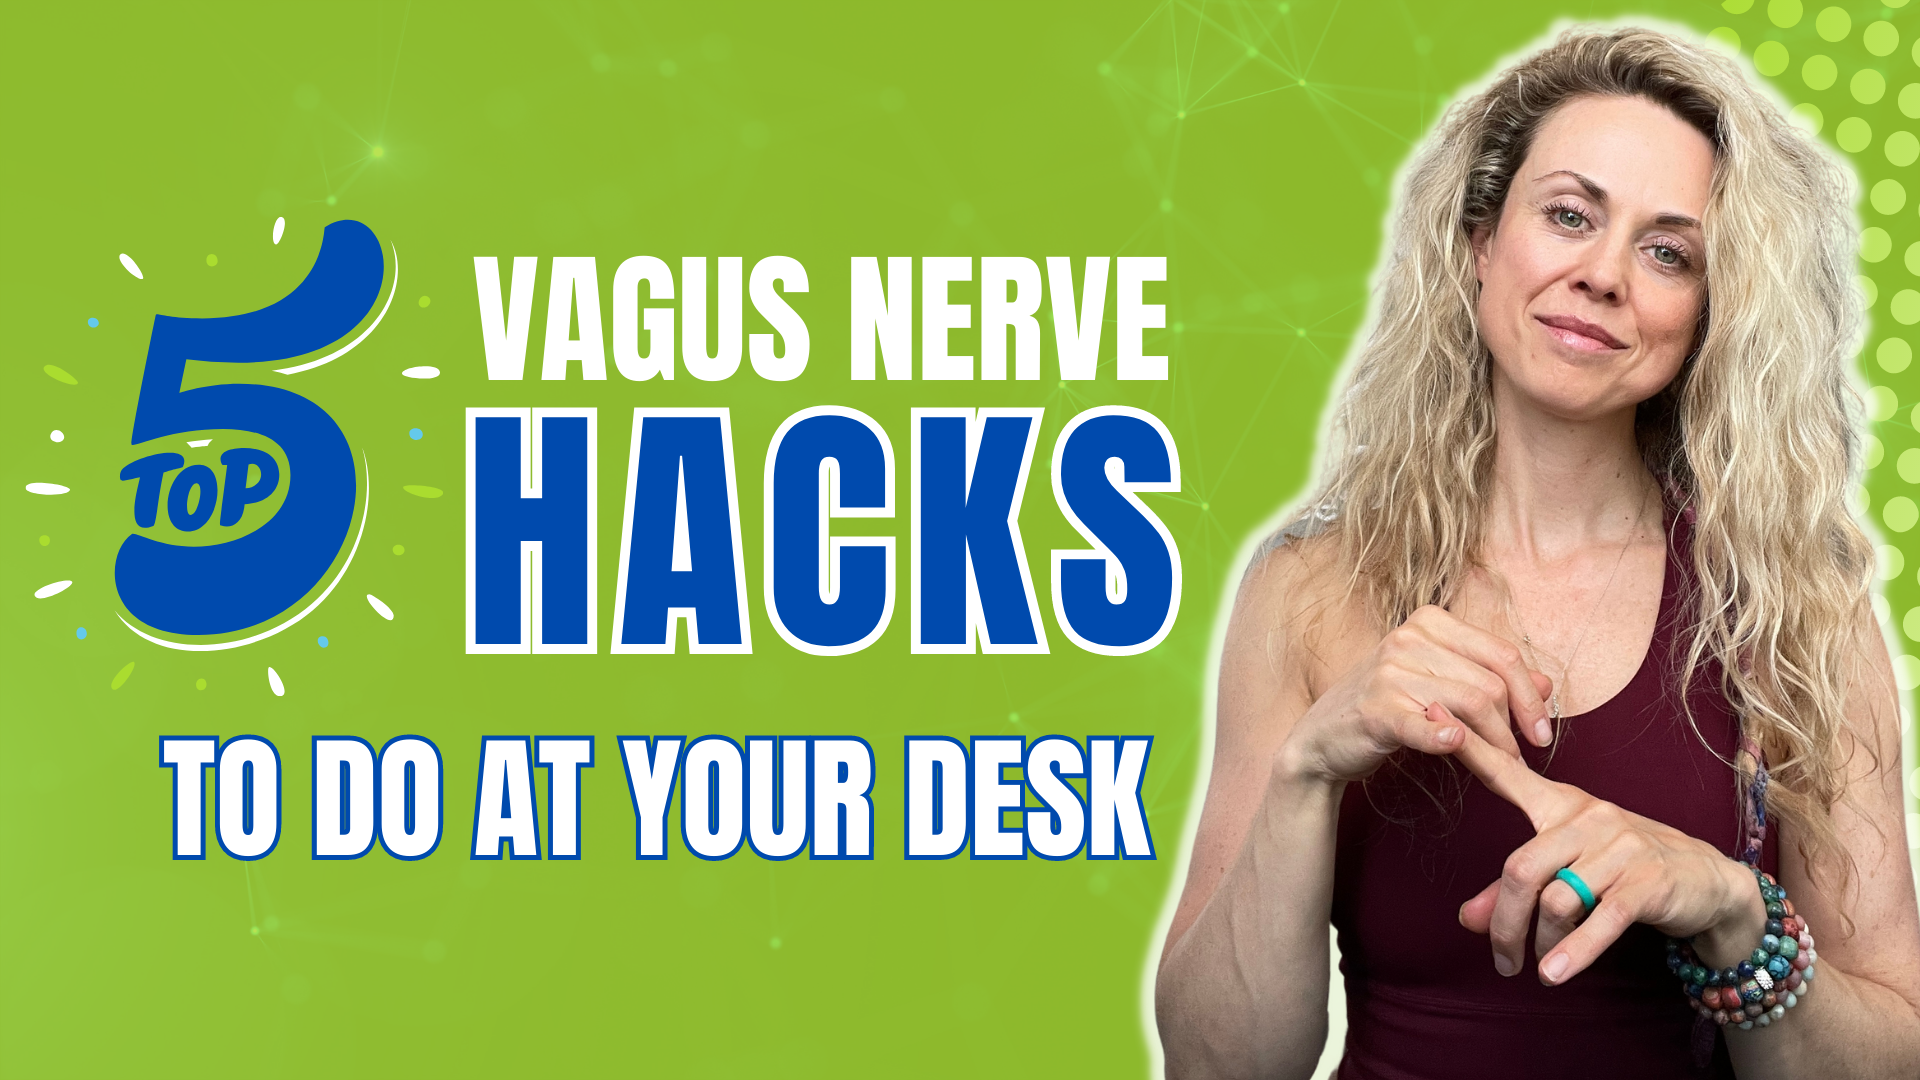 Top 5 vagus nerve hacks to do at your desk